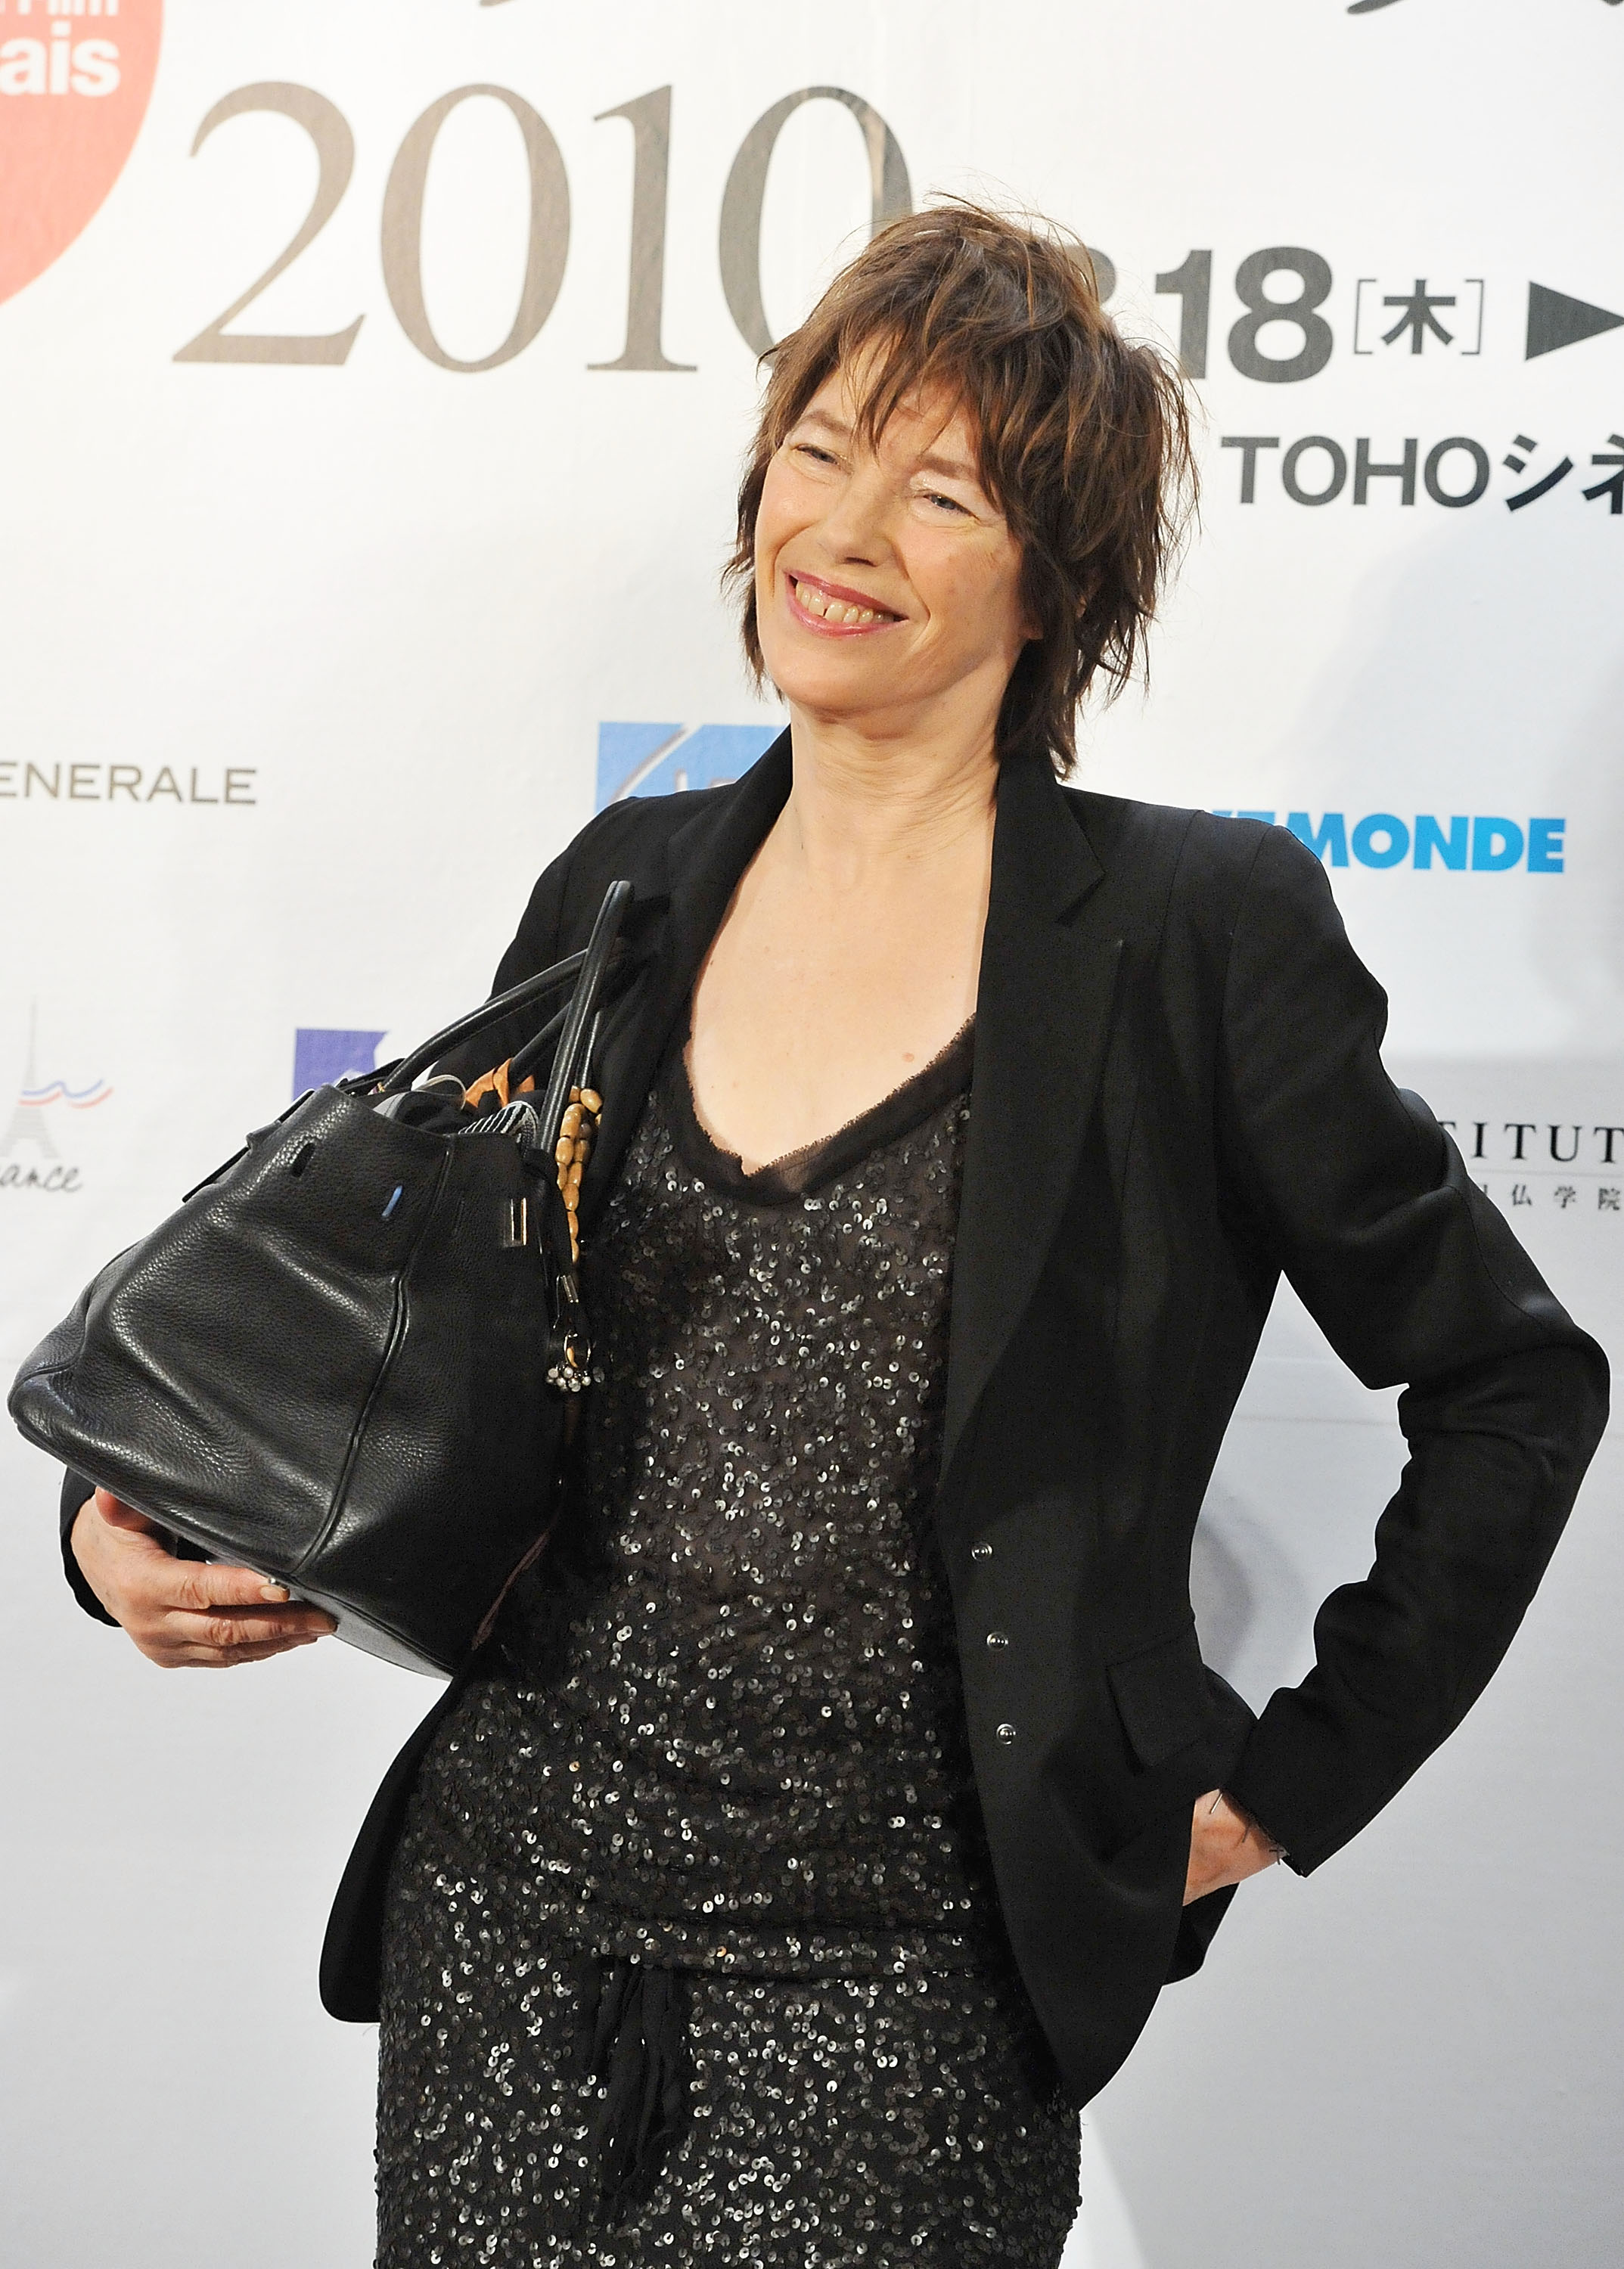 How Jane Birkin inspired one of today's most luxurious status symbols